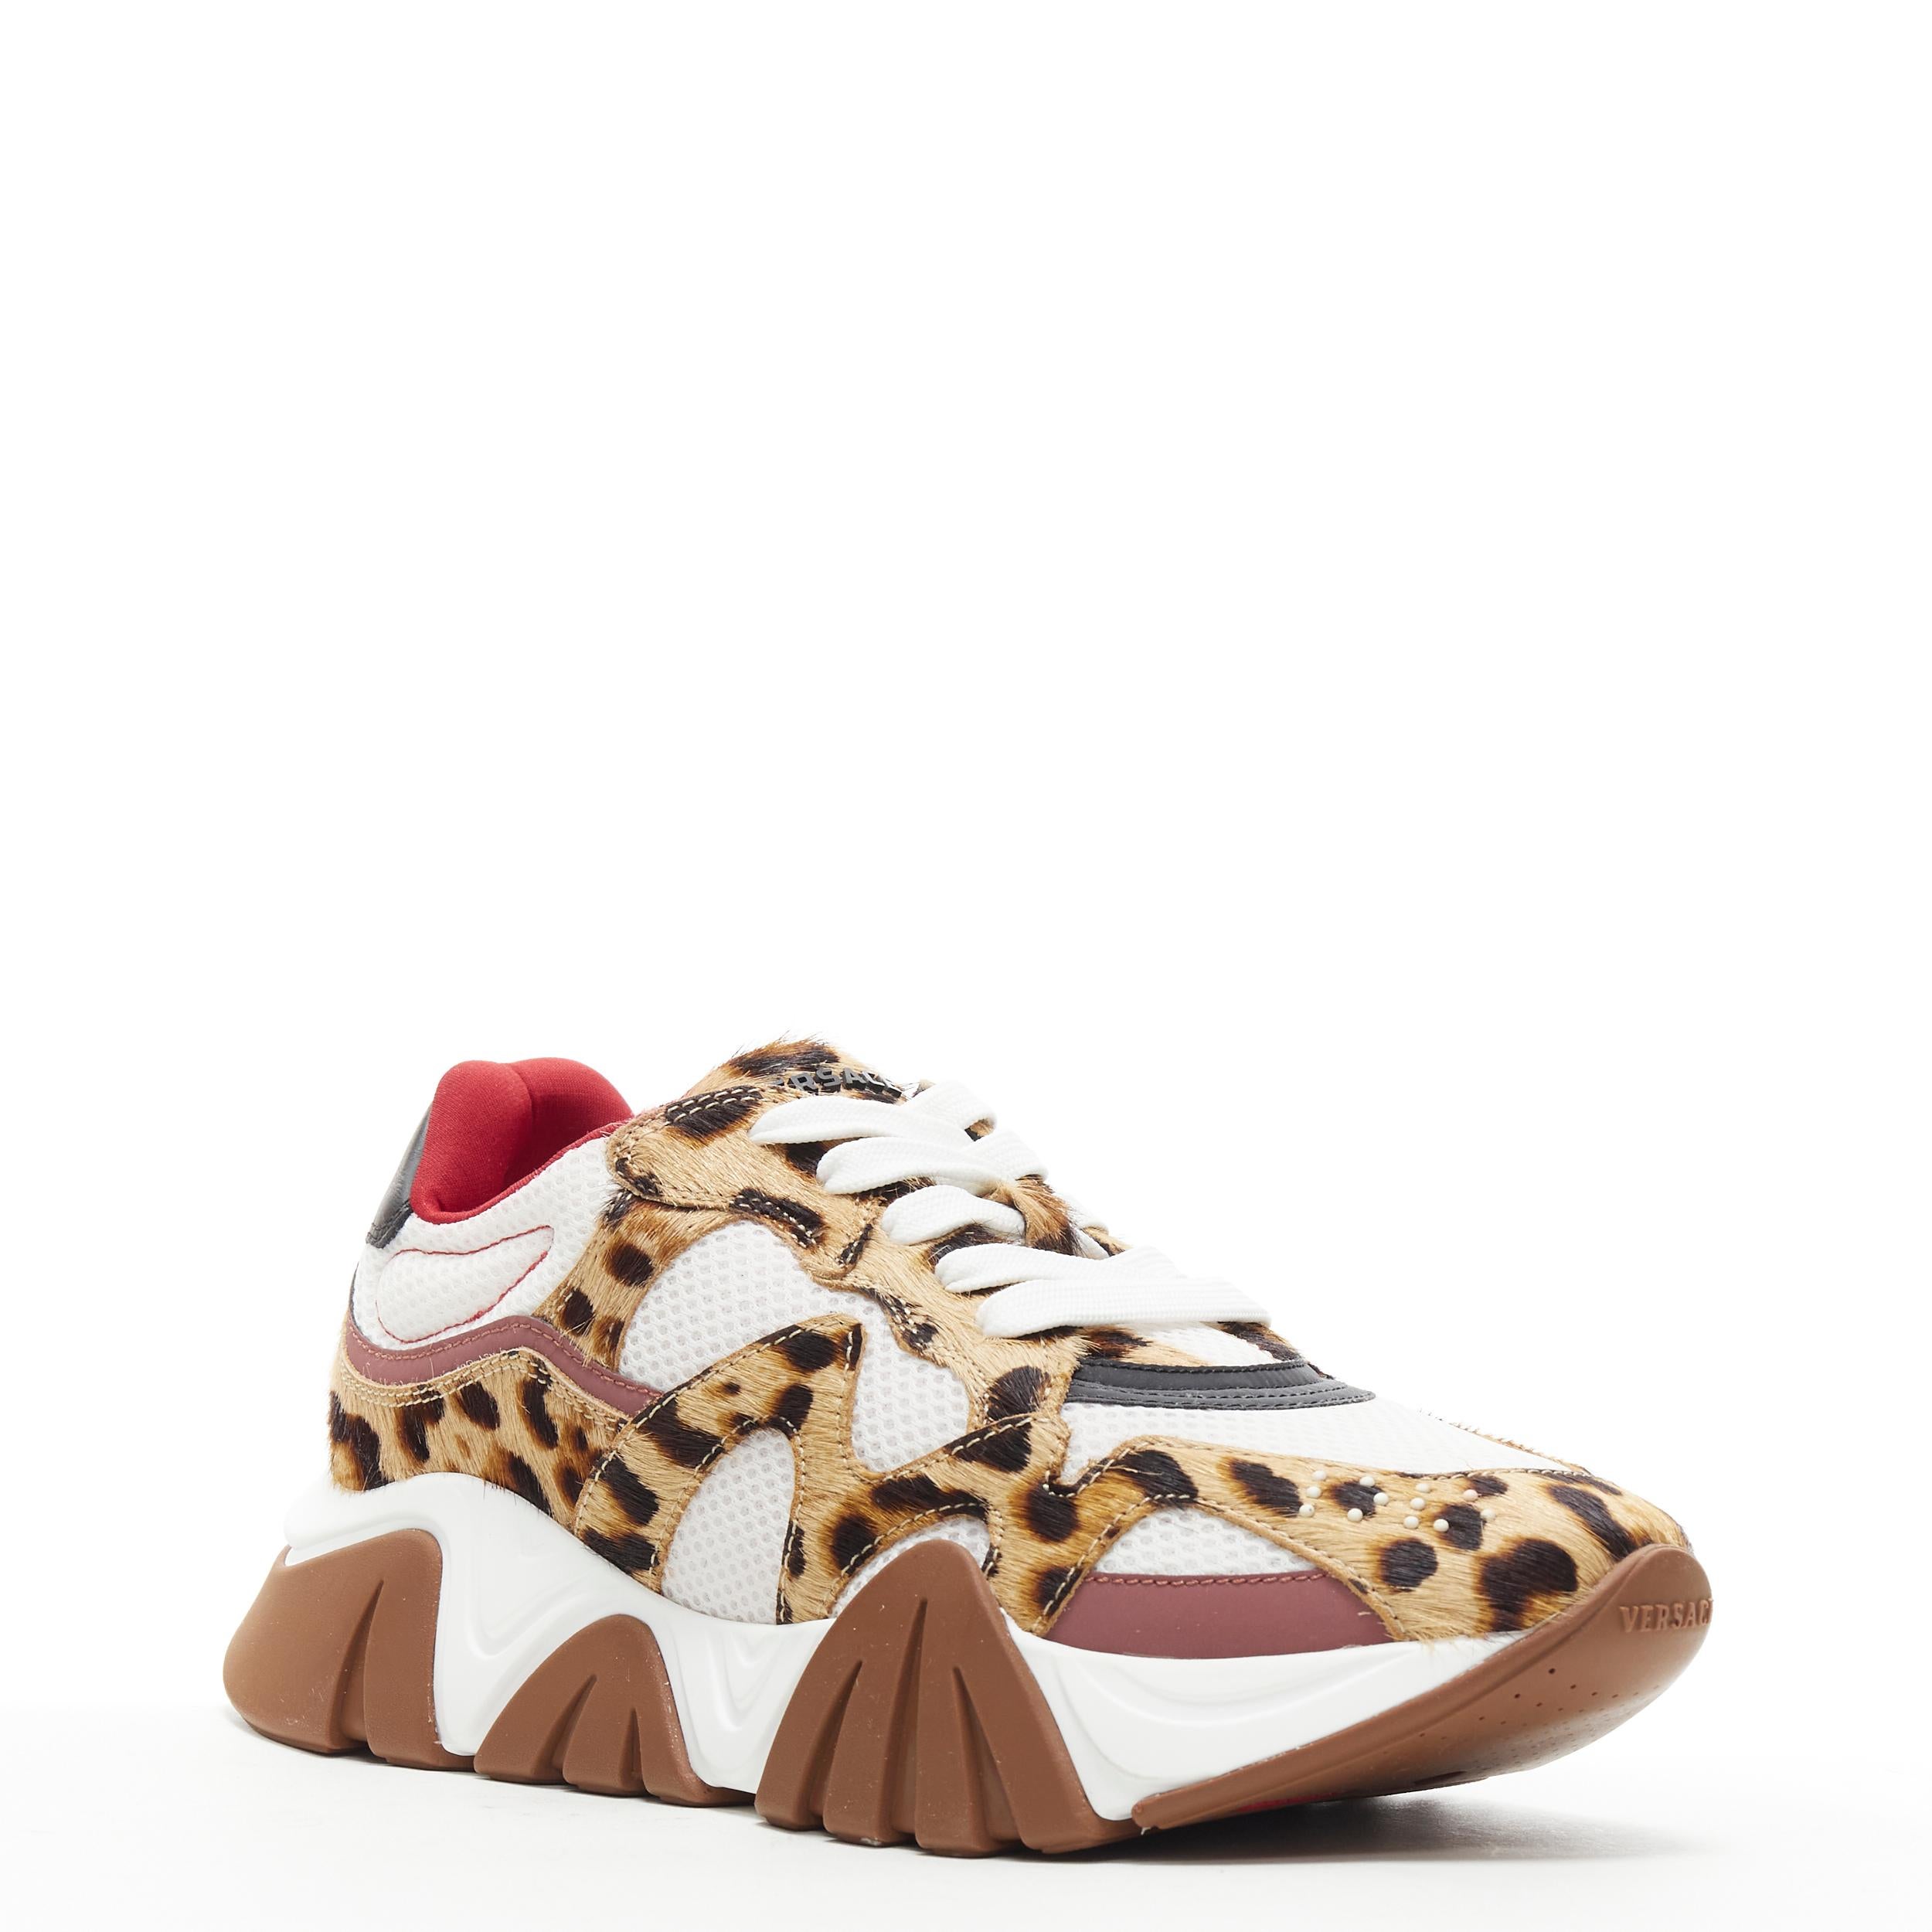 new VERSACE Squalo leopard calf hair low top sneakers 
Reference: TGAS/B00587 
Brand: Versace 
Designer: Donatella Versace 
Model: Squalo 
Material: Leather 
Color: Brown 
Pattern: Leopard 
Extra Detail: Squalo sneakers. 
Made in: Italy